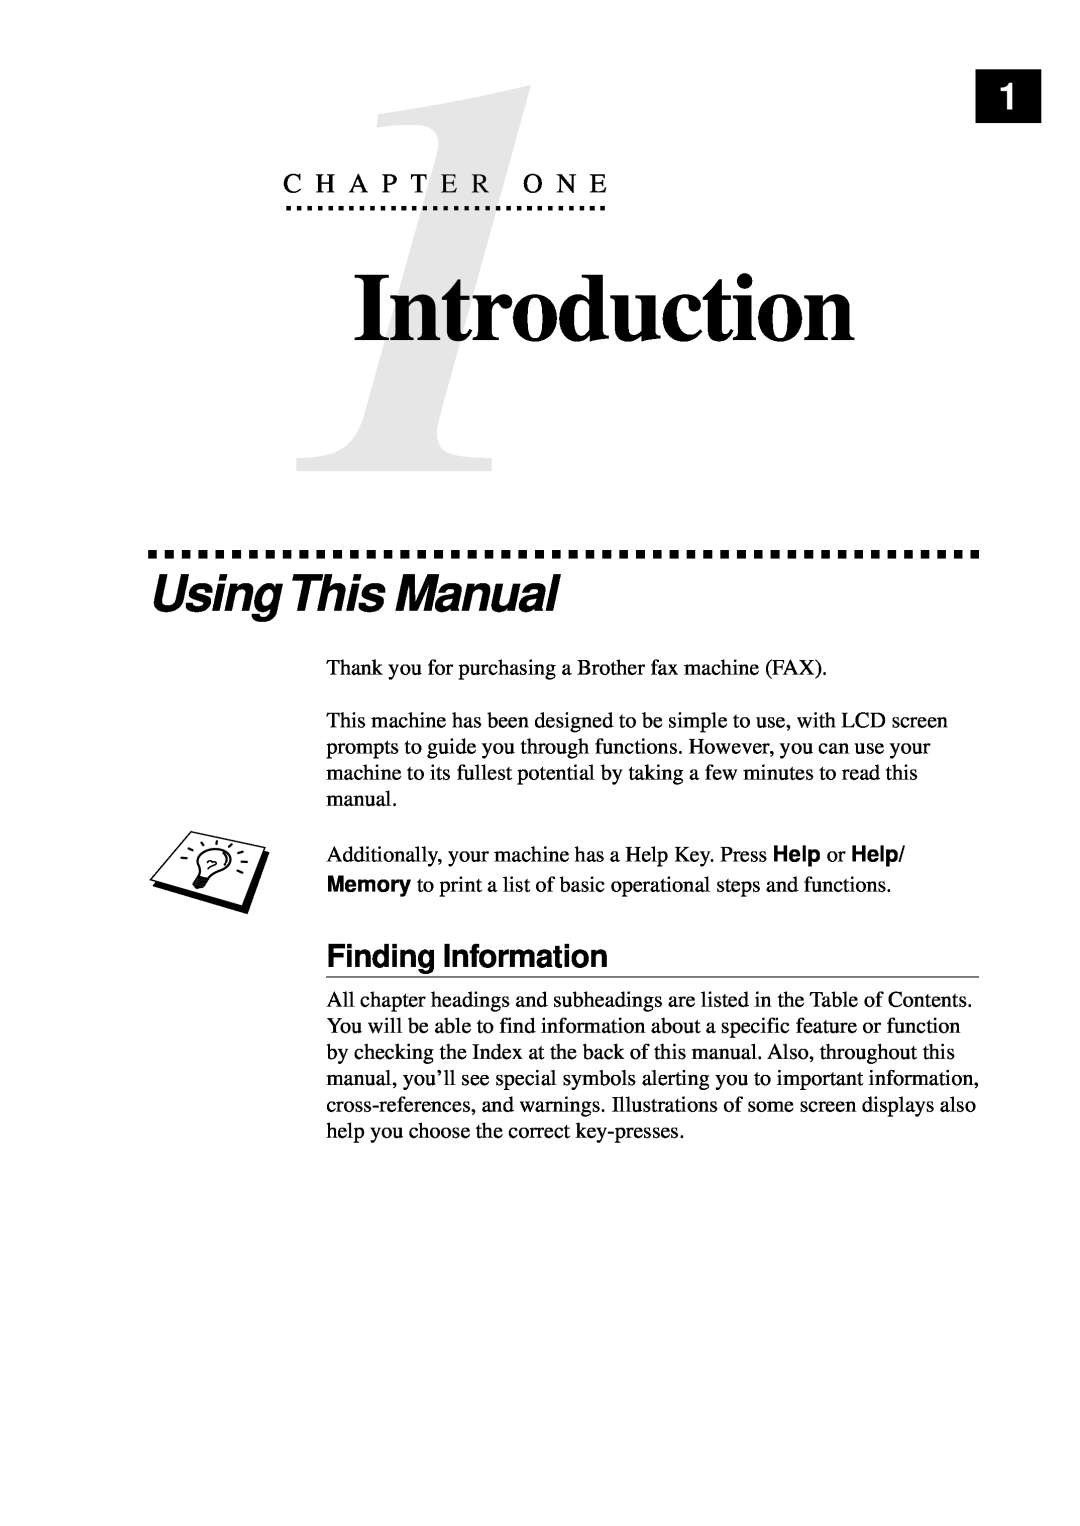 Brother 515 manual Introduction, UsingThis Manual, Finding Information, C H A P T E R O N E 